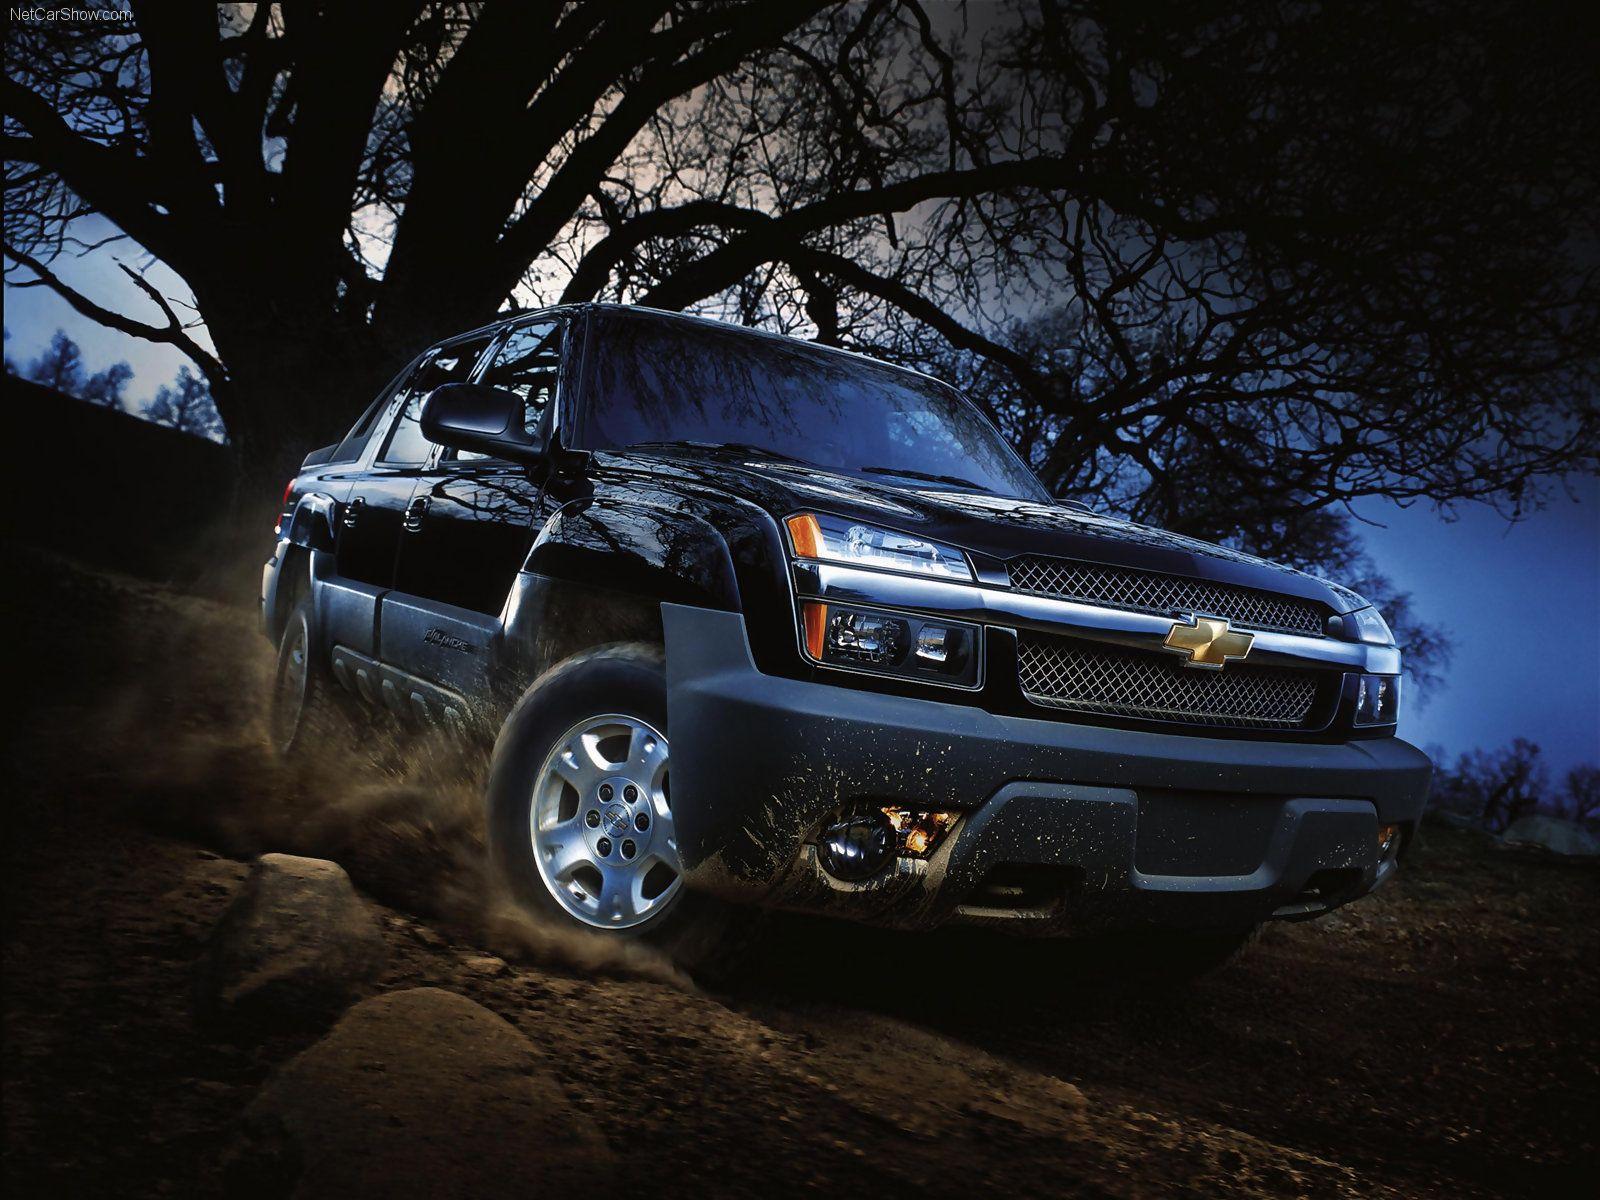 Chevrolet Avalanche Wallpaper HD Photo, Wallpaper and other Image